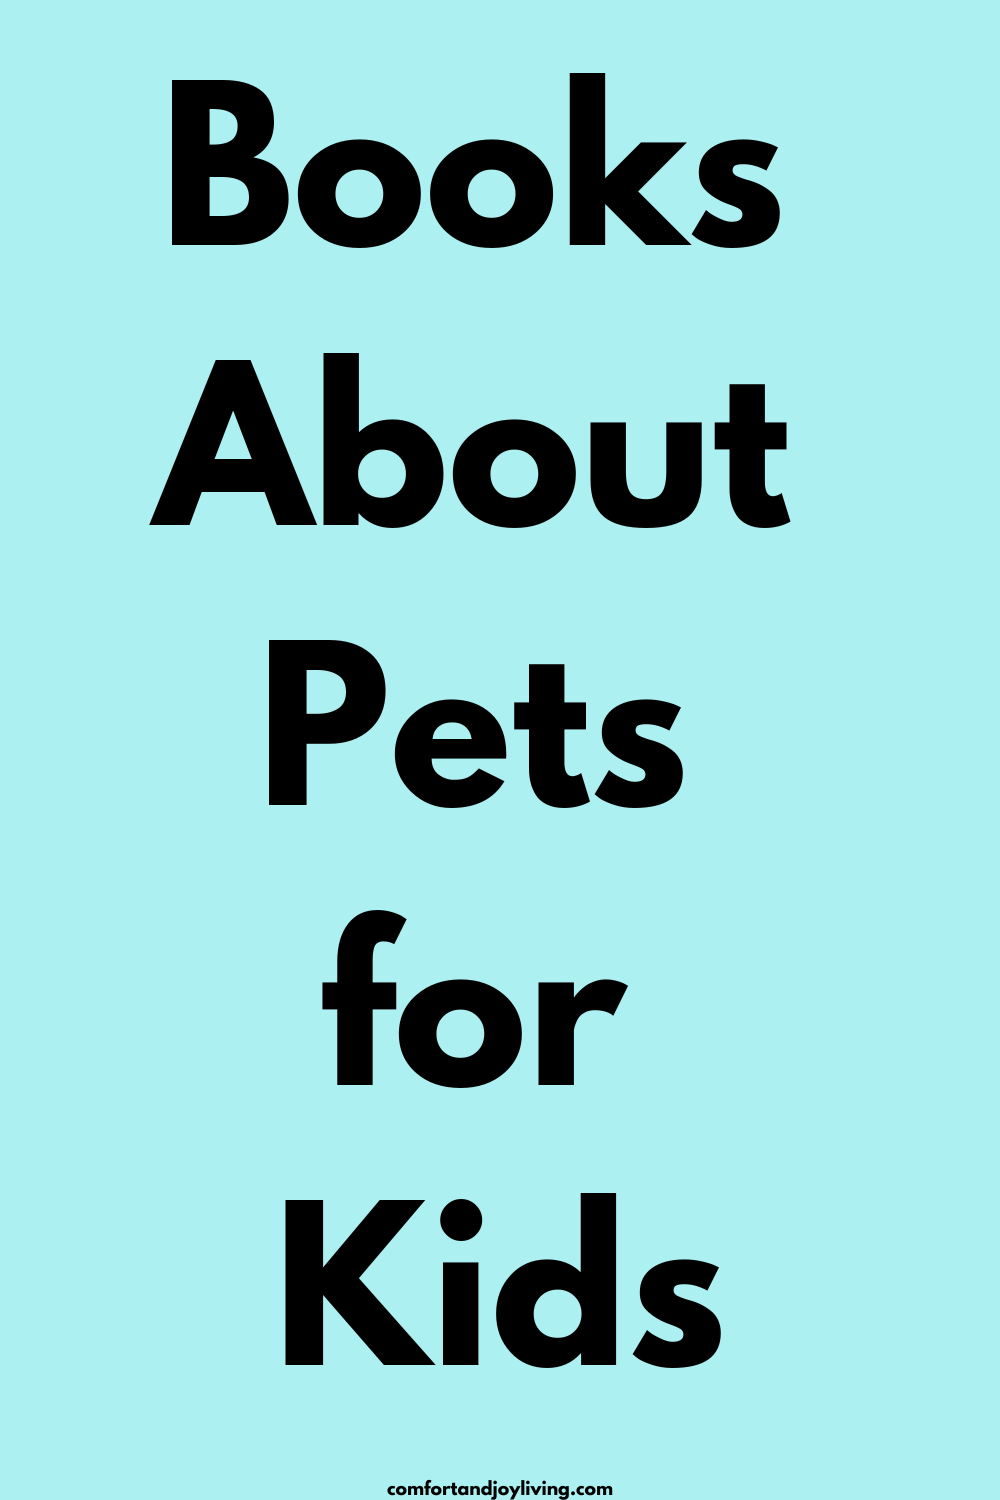 Books About Pets for Kids